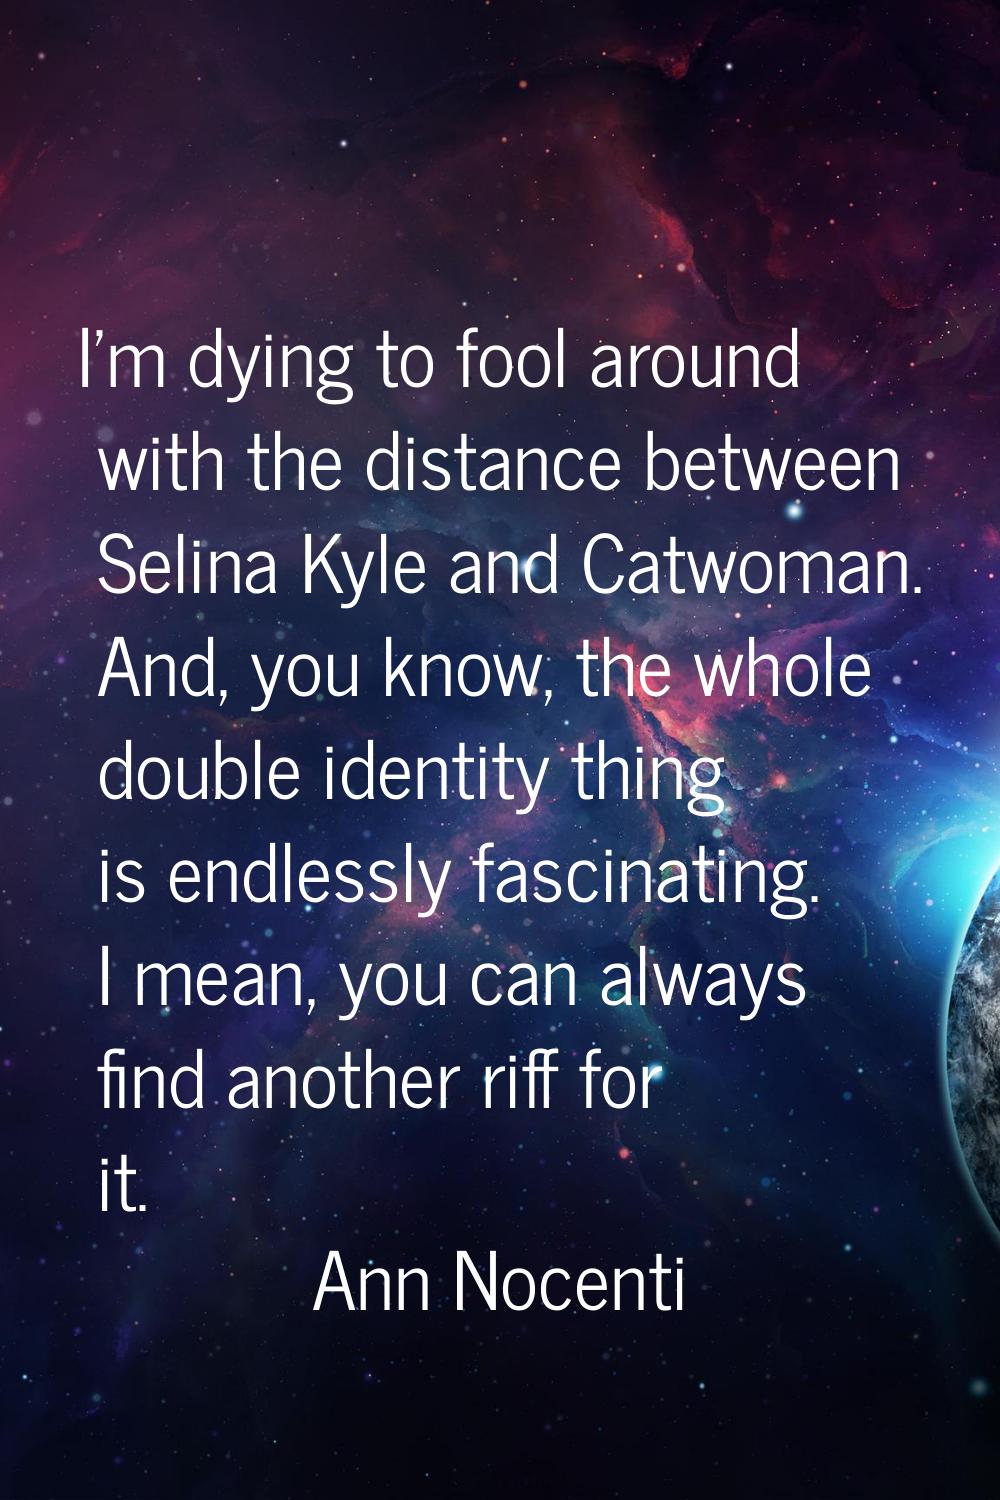 I'm dying to fool around with the distance between Selina Kyle and Catwoman. And, you know, the who